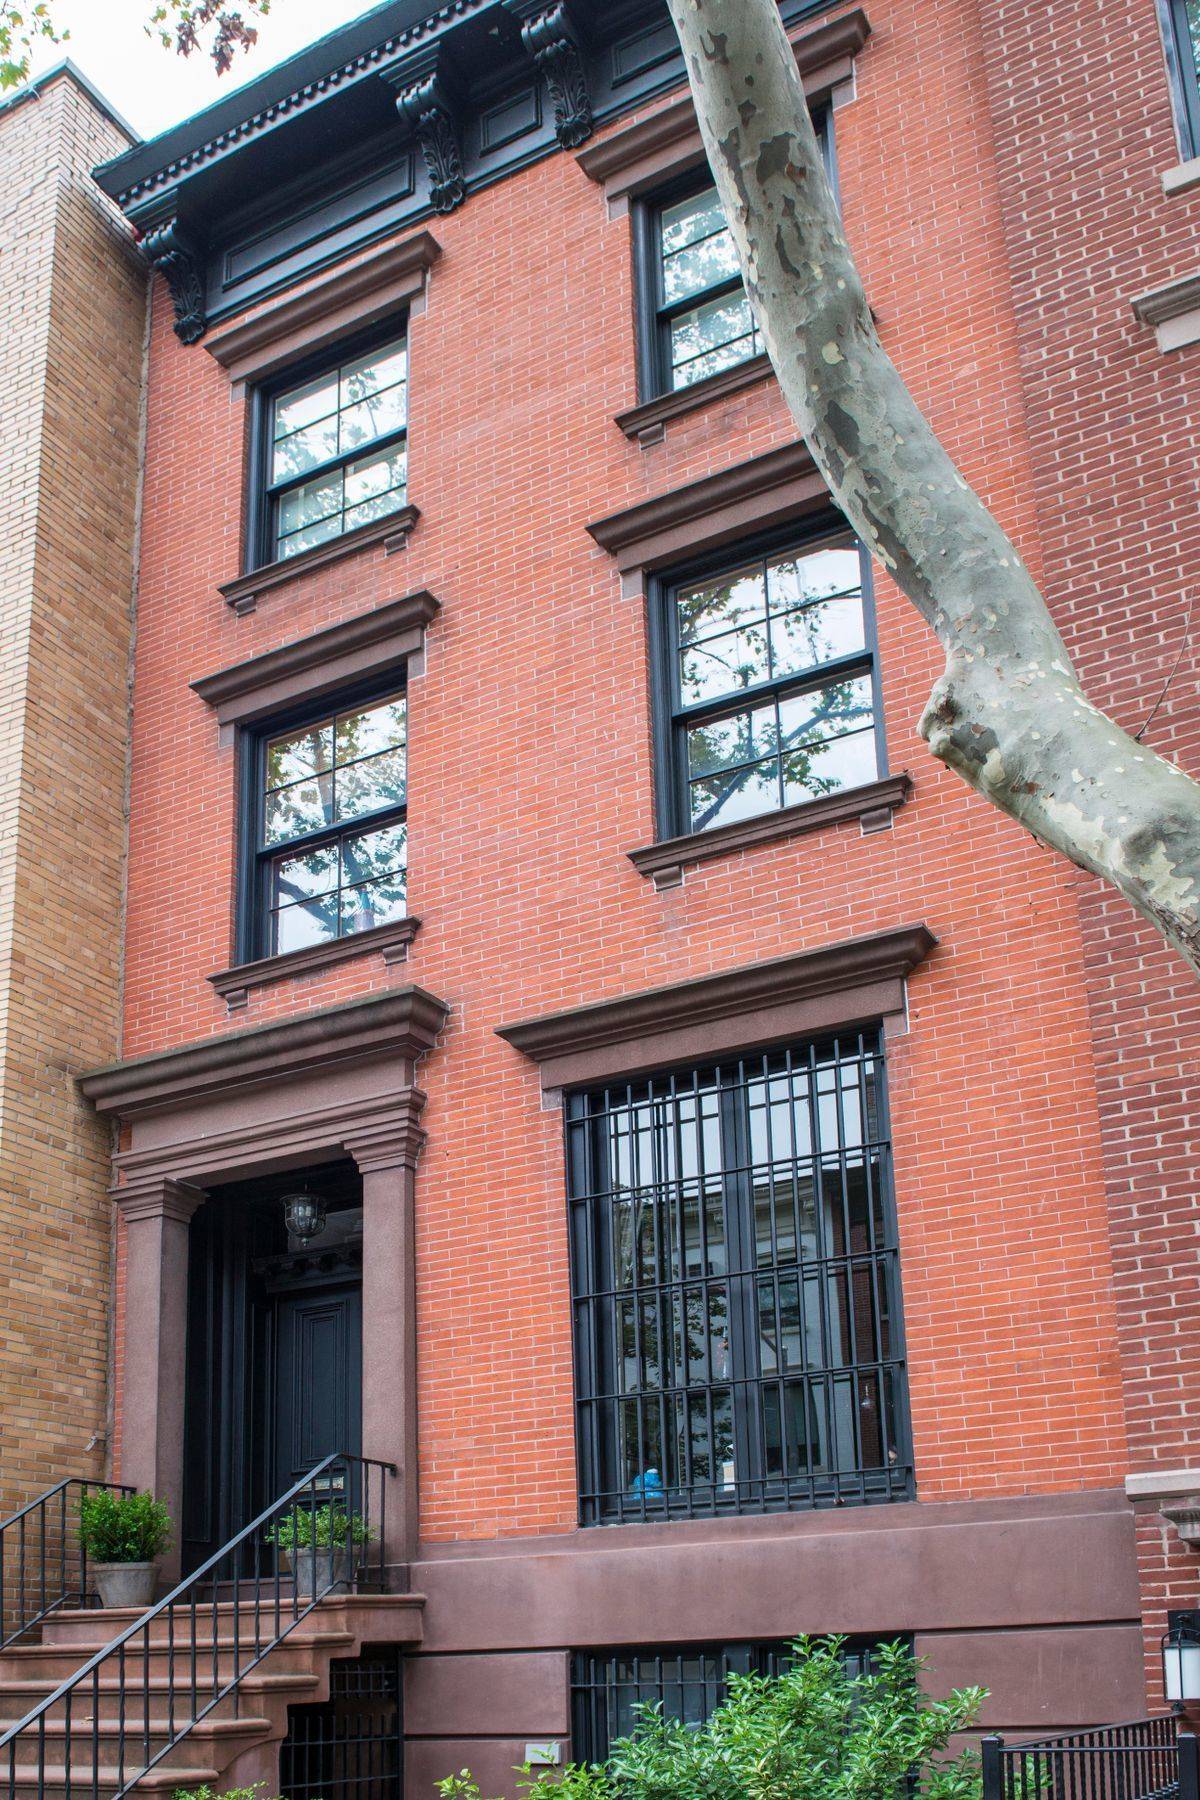 Welcome to this gorgeous, turn of the century four story brick faA ade townhouse located in the heart of Kips Bay between Second and Third Avenues.